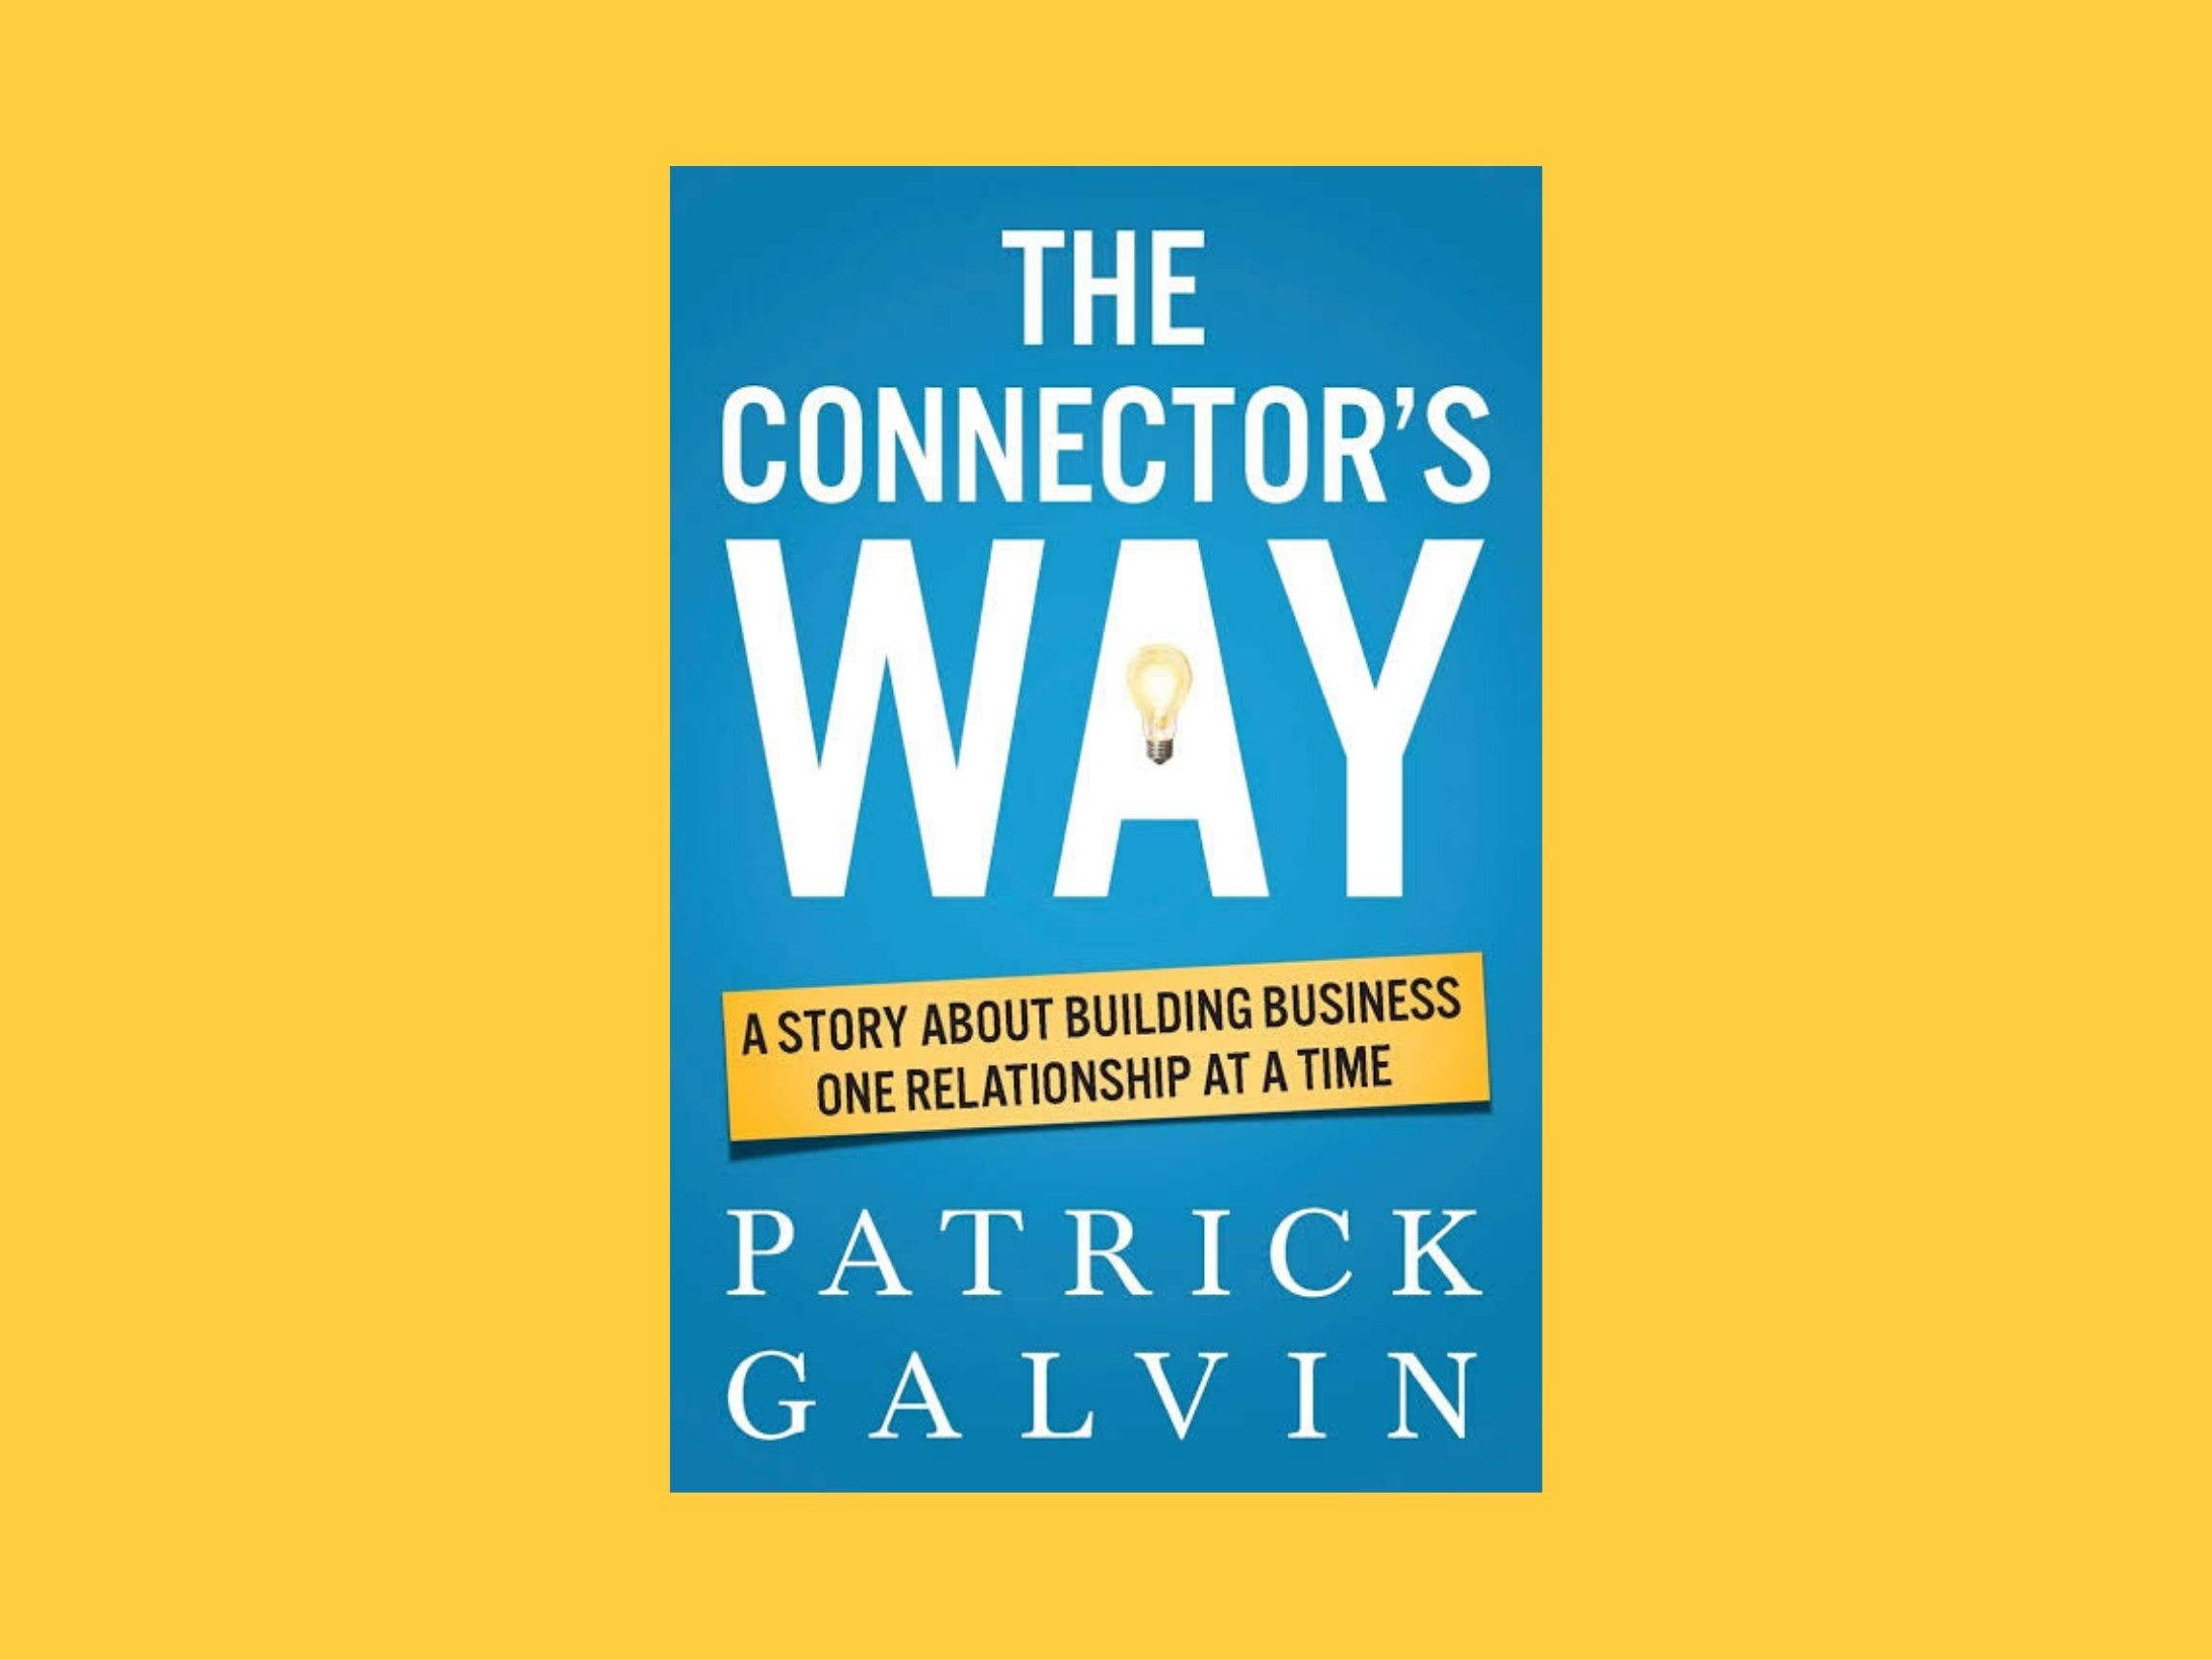 The Connector's Way by Patrick Galvin